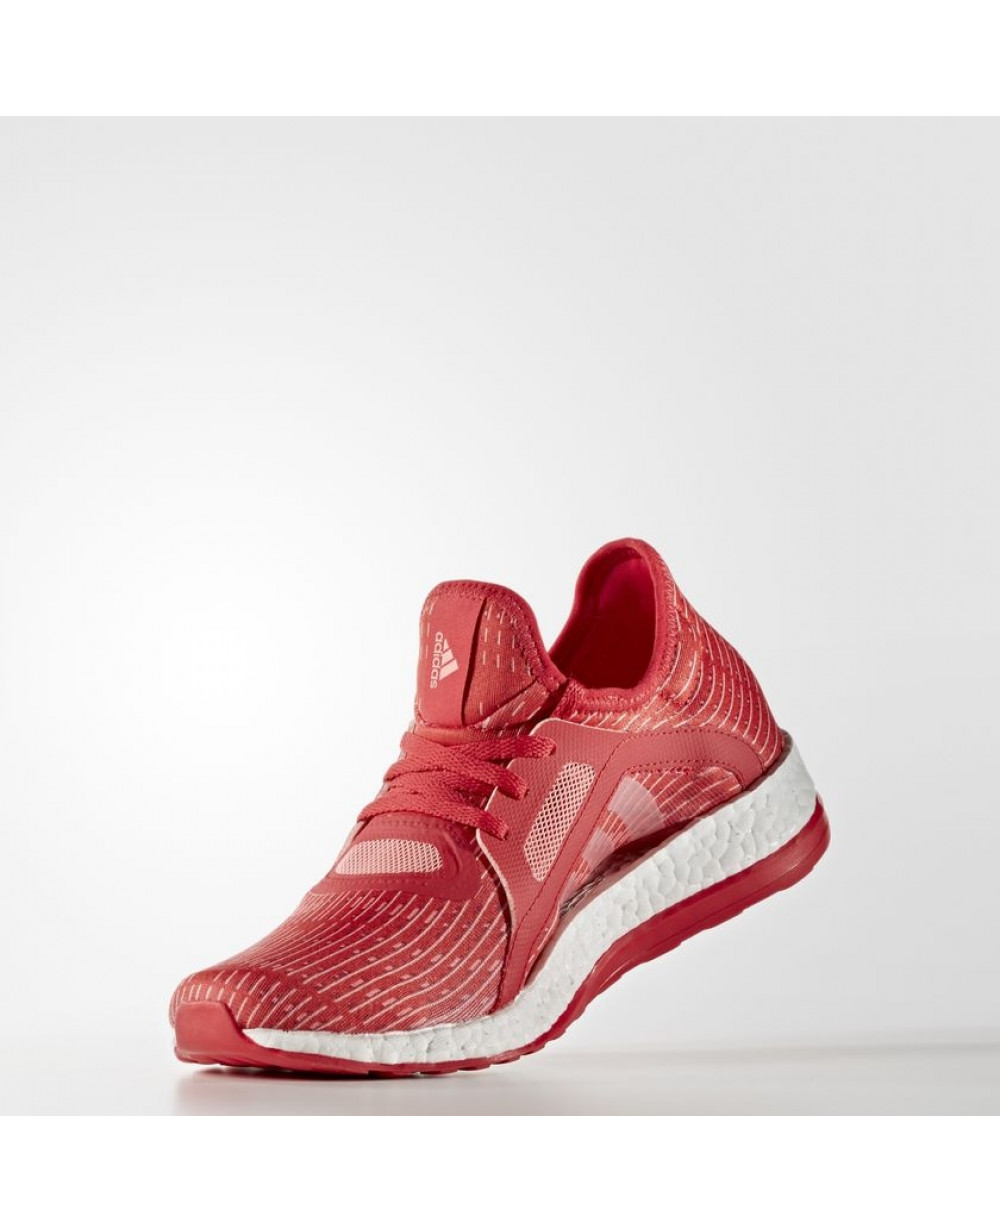 Adidas Pure Boost X Shoes For Women AQ3399